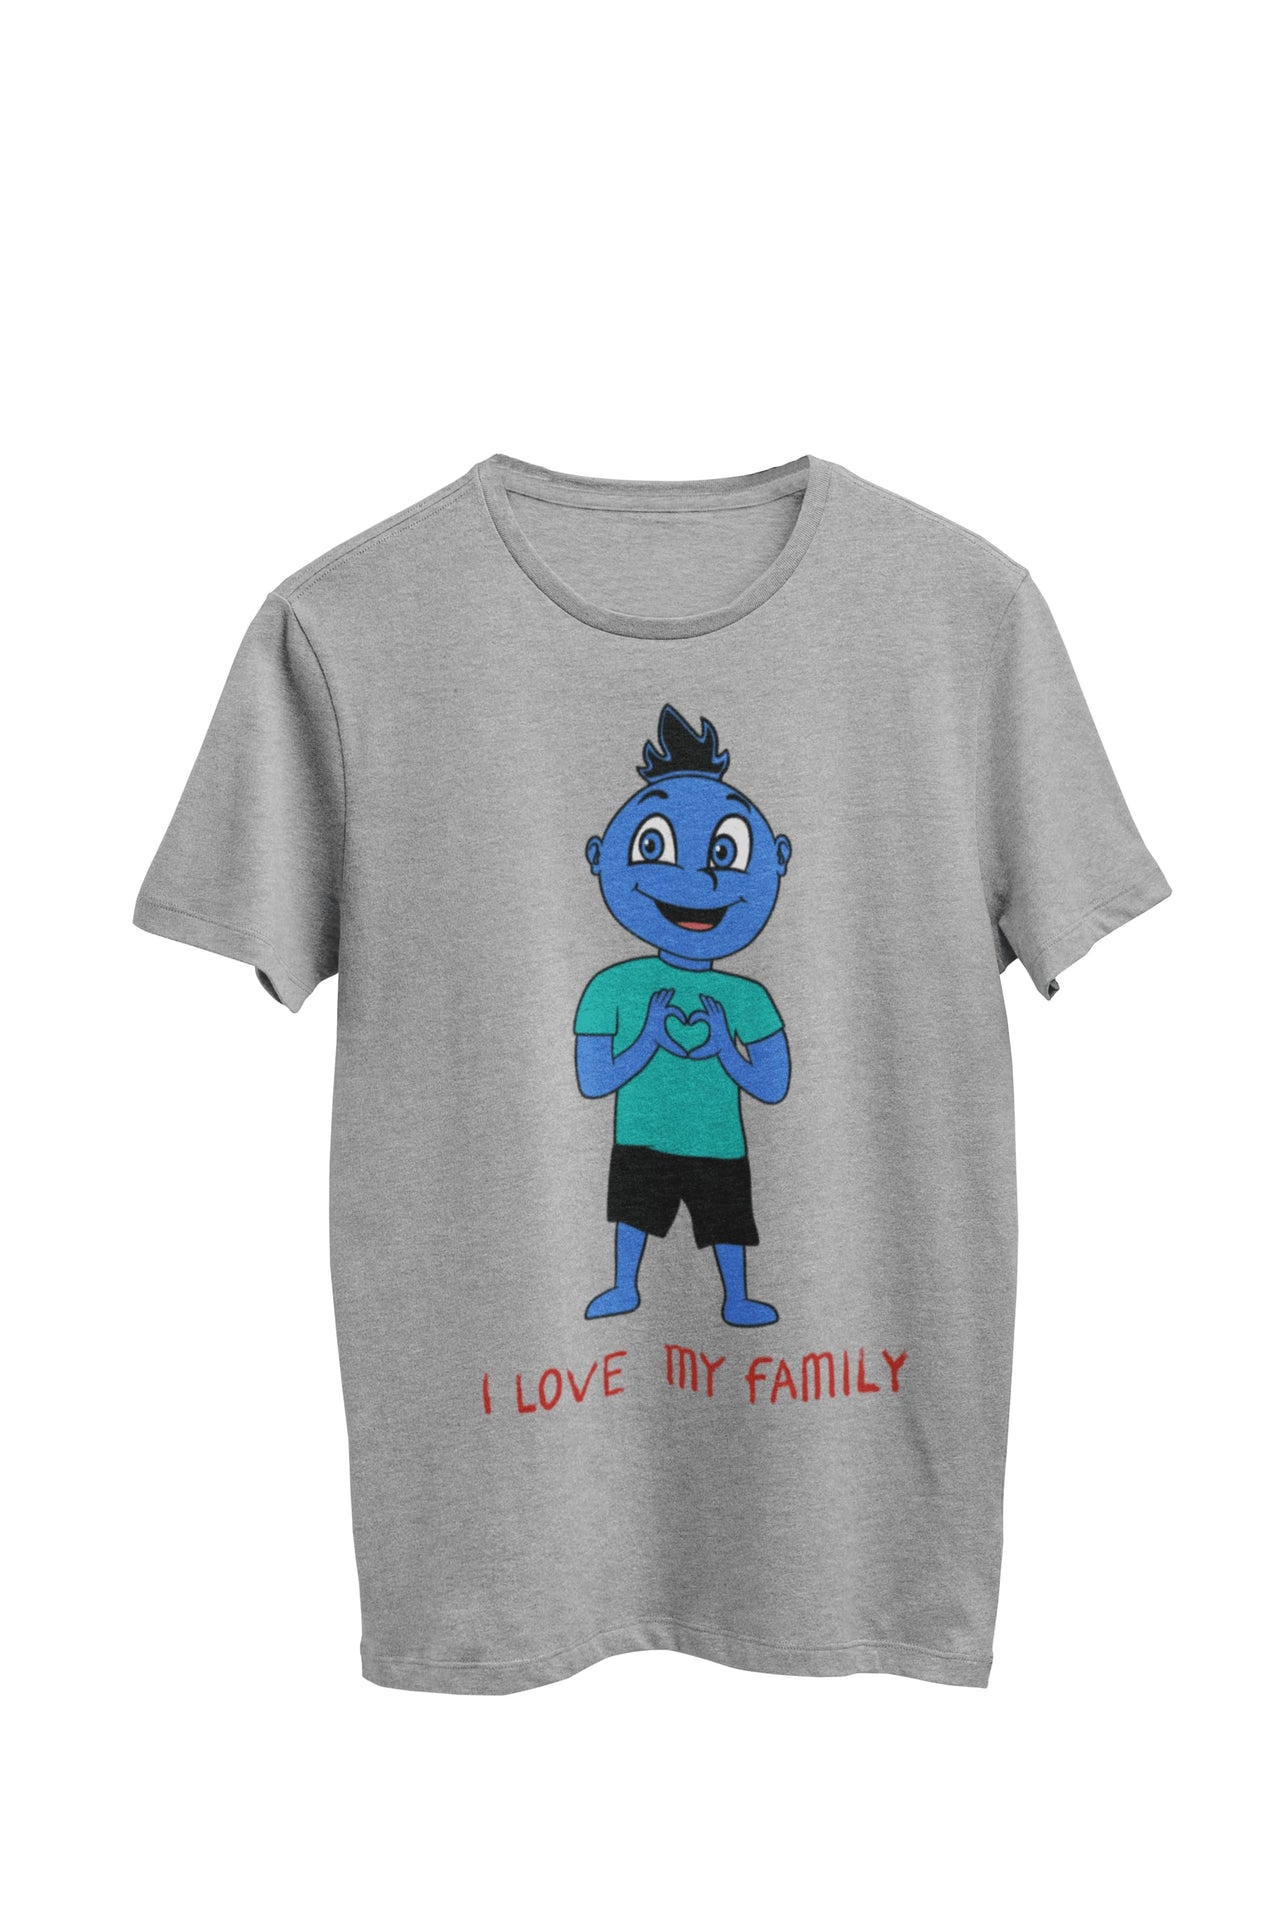 WooHooBerry expressing love for family with a heart symbol formed by hands, a gray T-shirt. A heartfelt gesture capturing the sentiment 'I love my family'